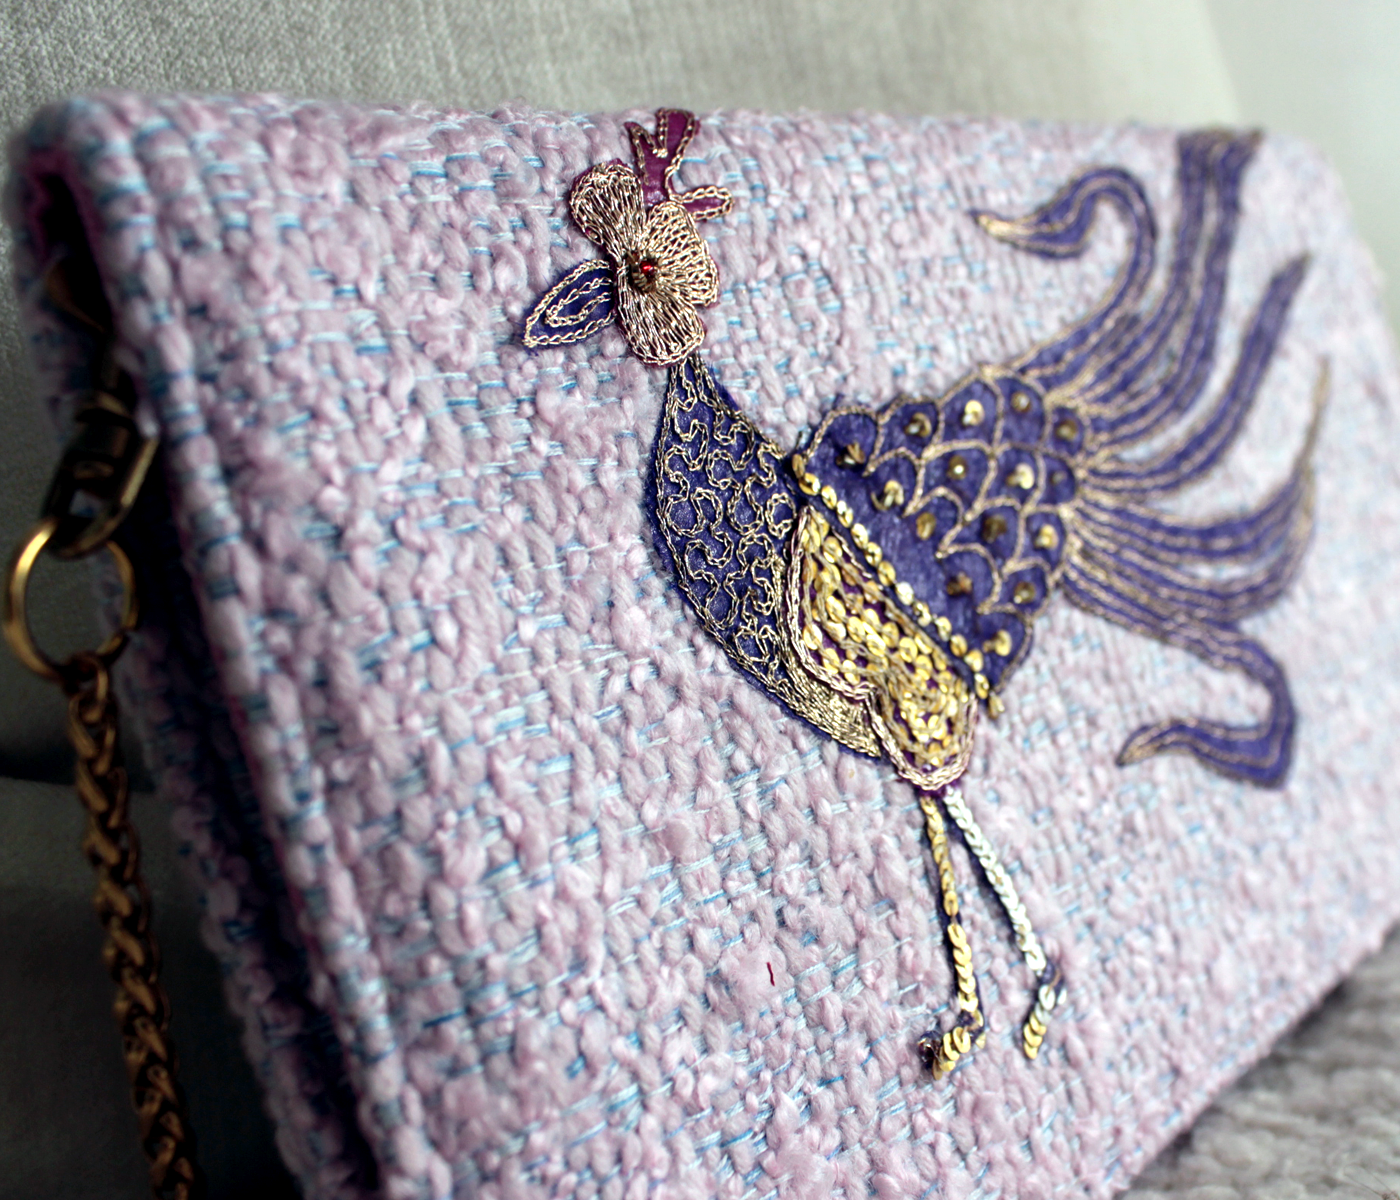 Handcrafted Lavender Wool Clutch with Vintage Embroidery Bird Design